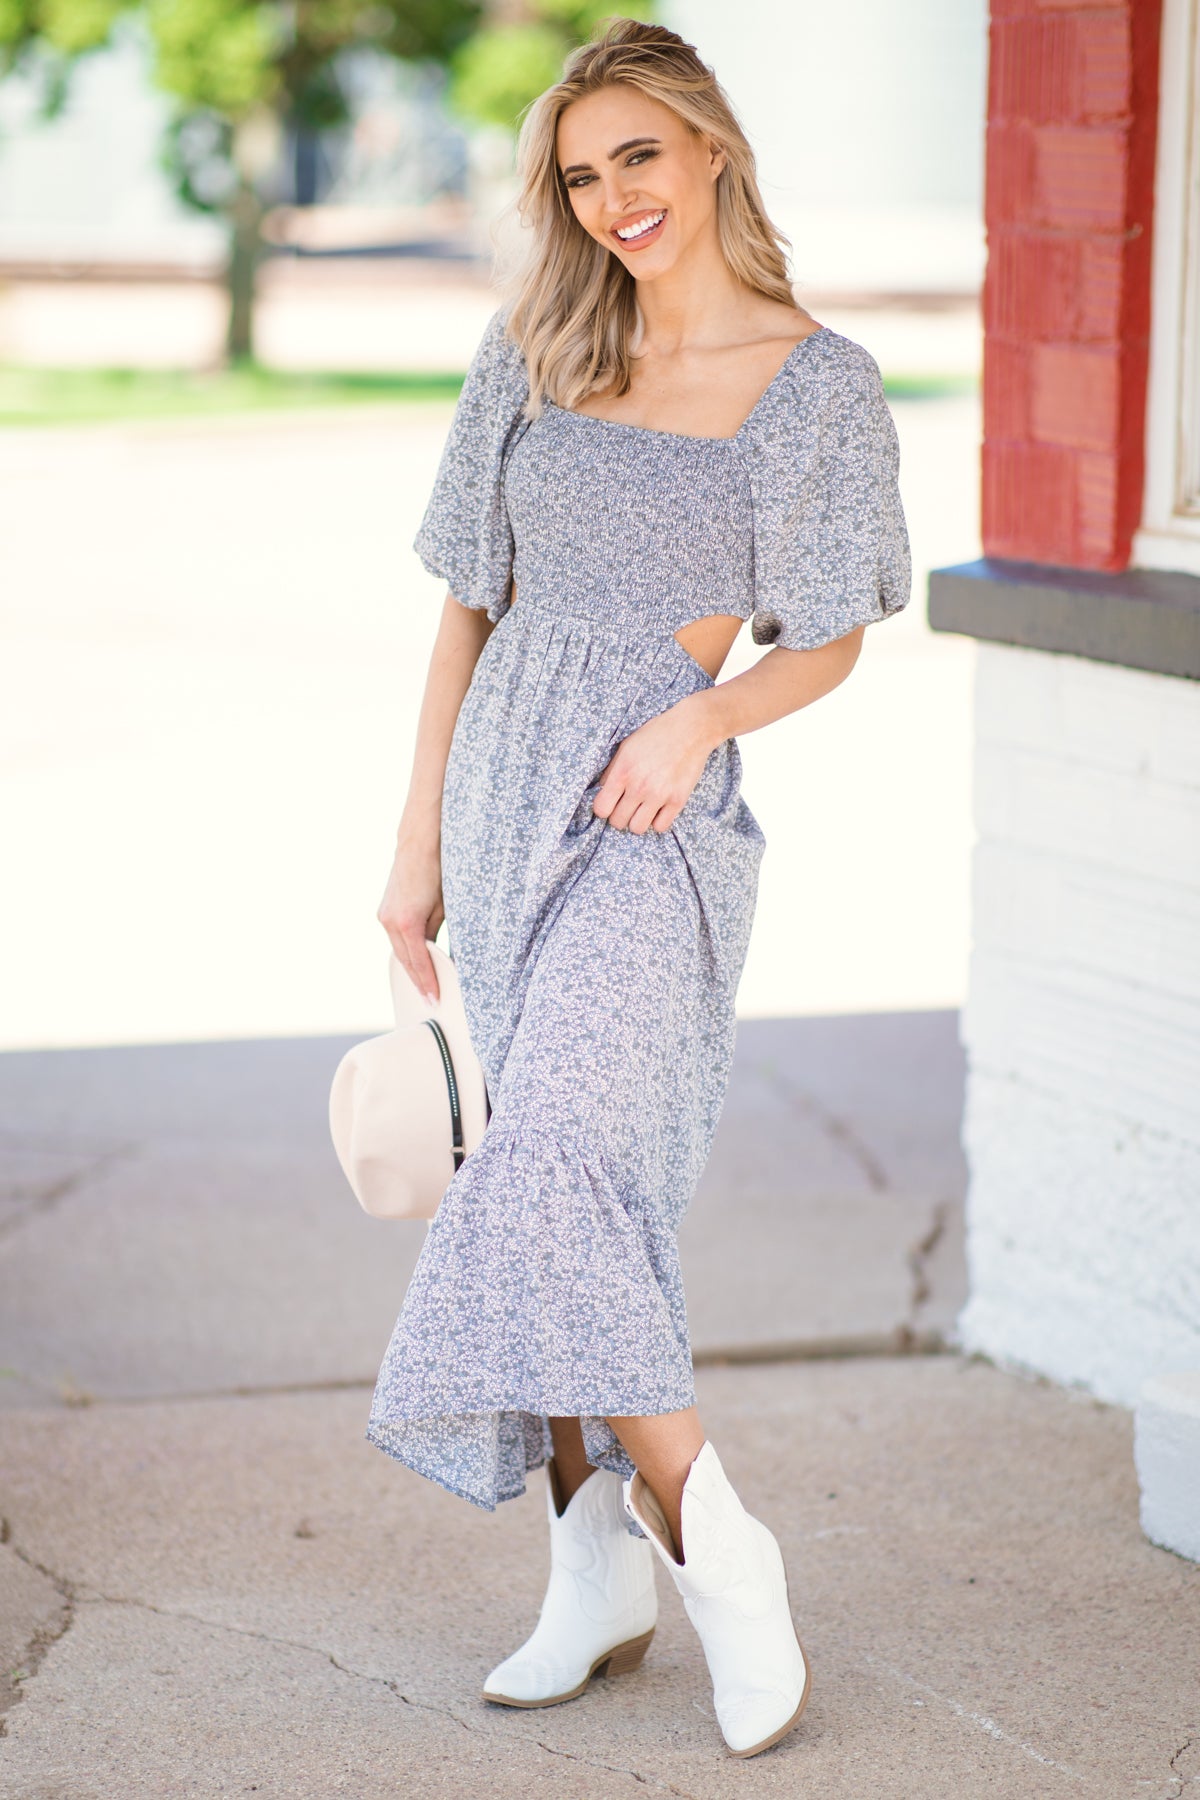 Slate Blue Floral Midi Dress with Back Cutout - Filly Flair